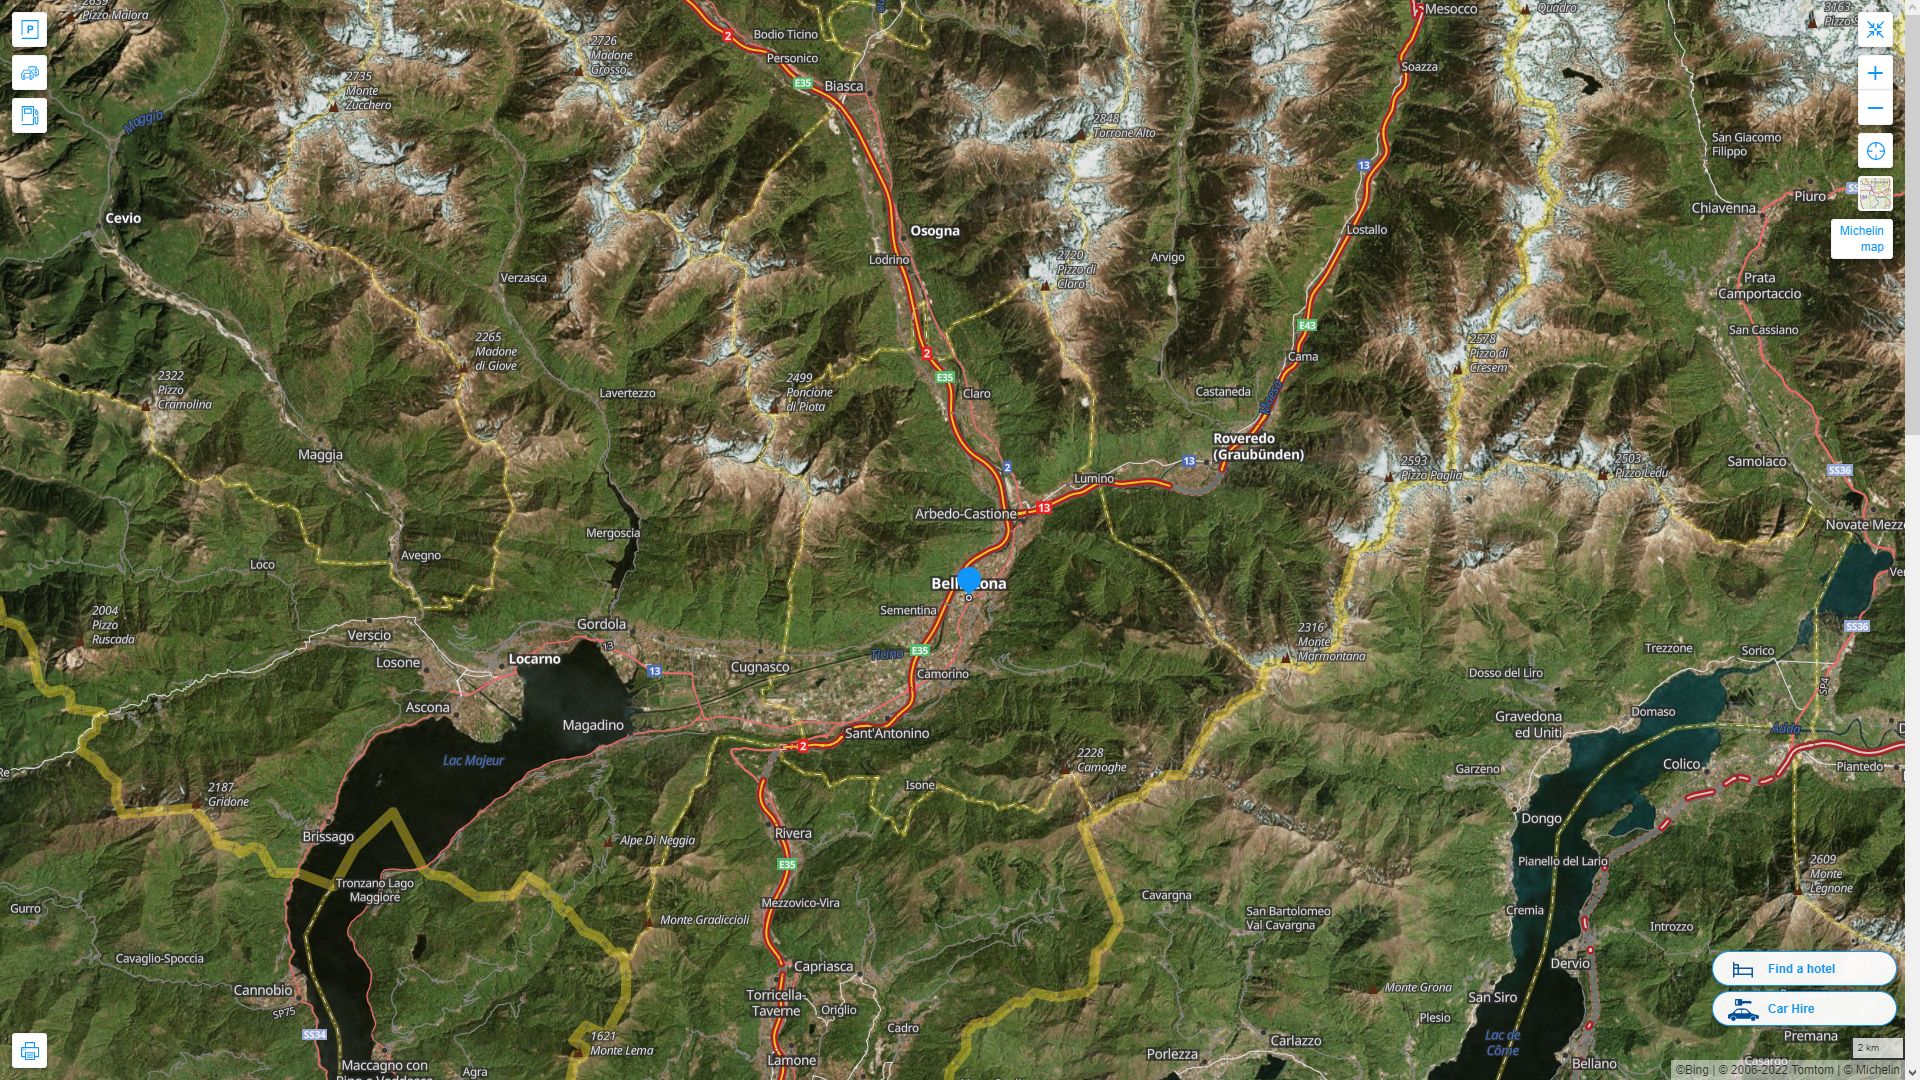 Bellinzona Highway and Road Map with Satellite View